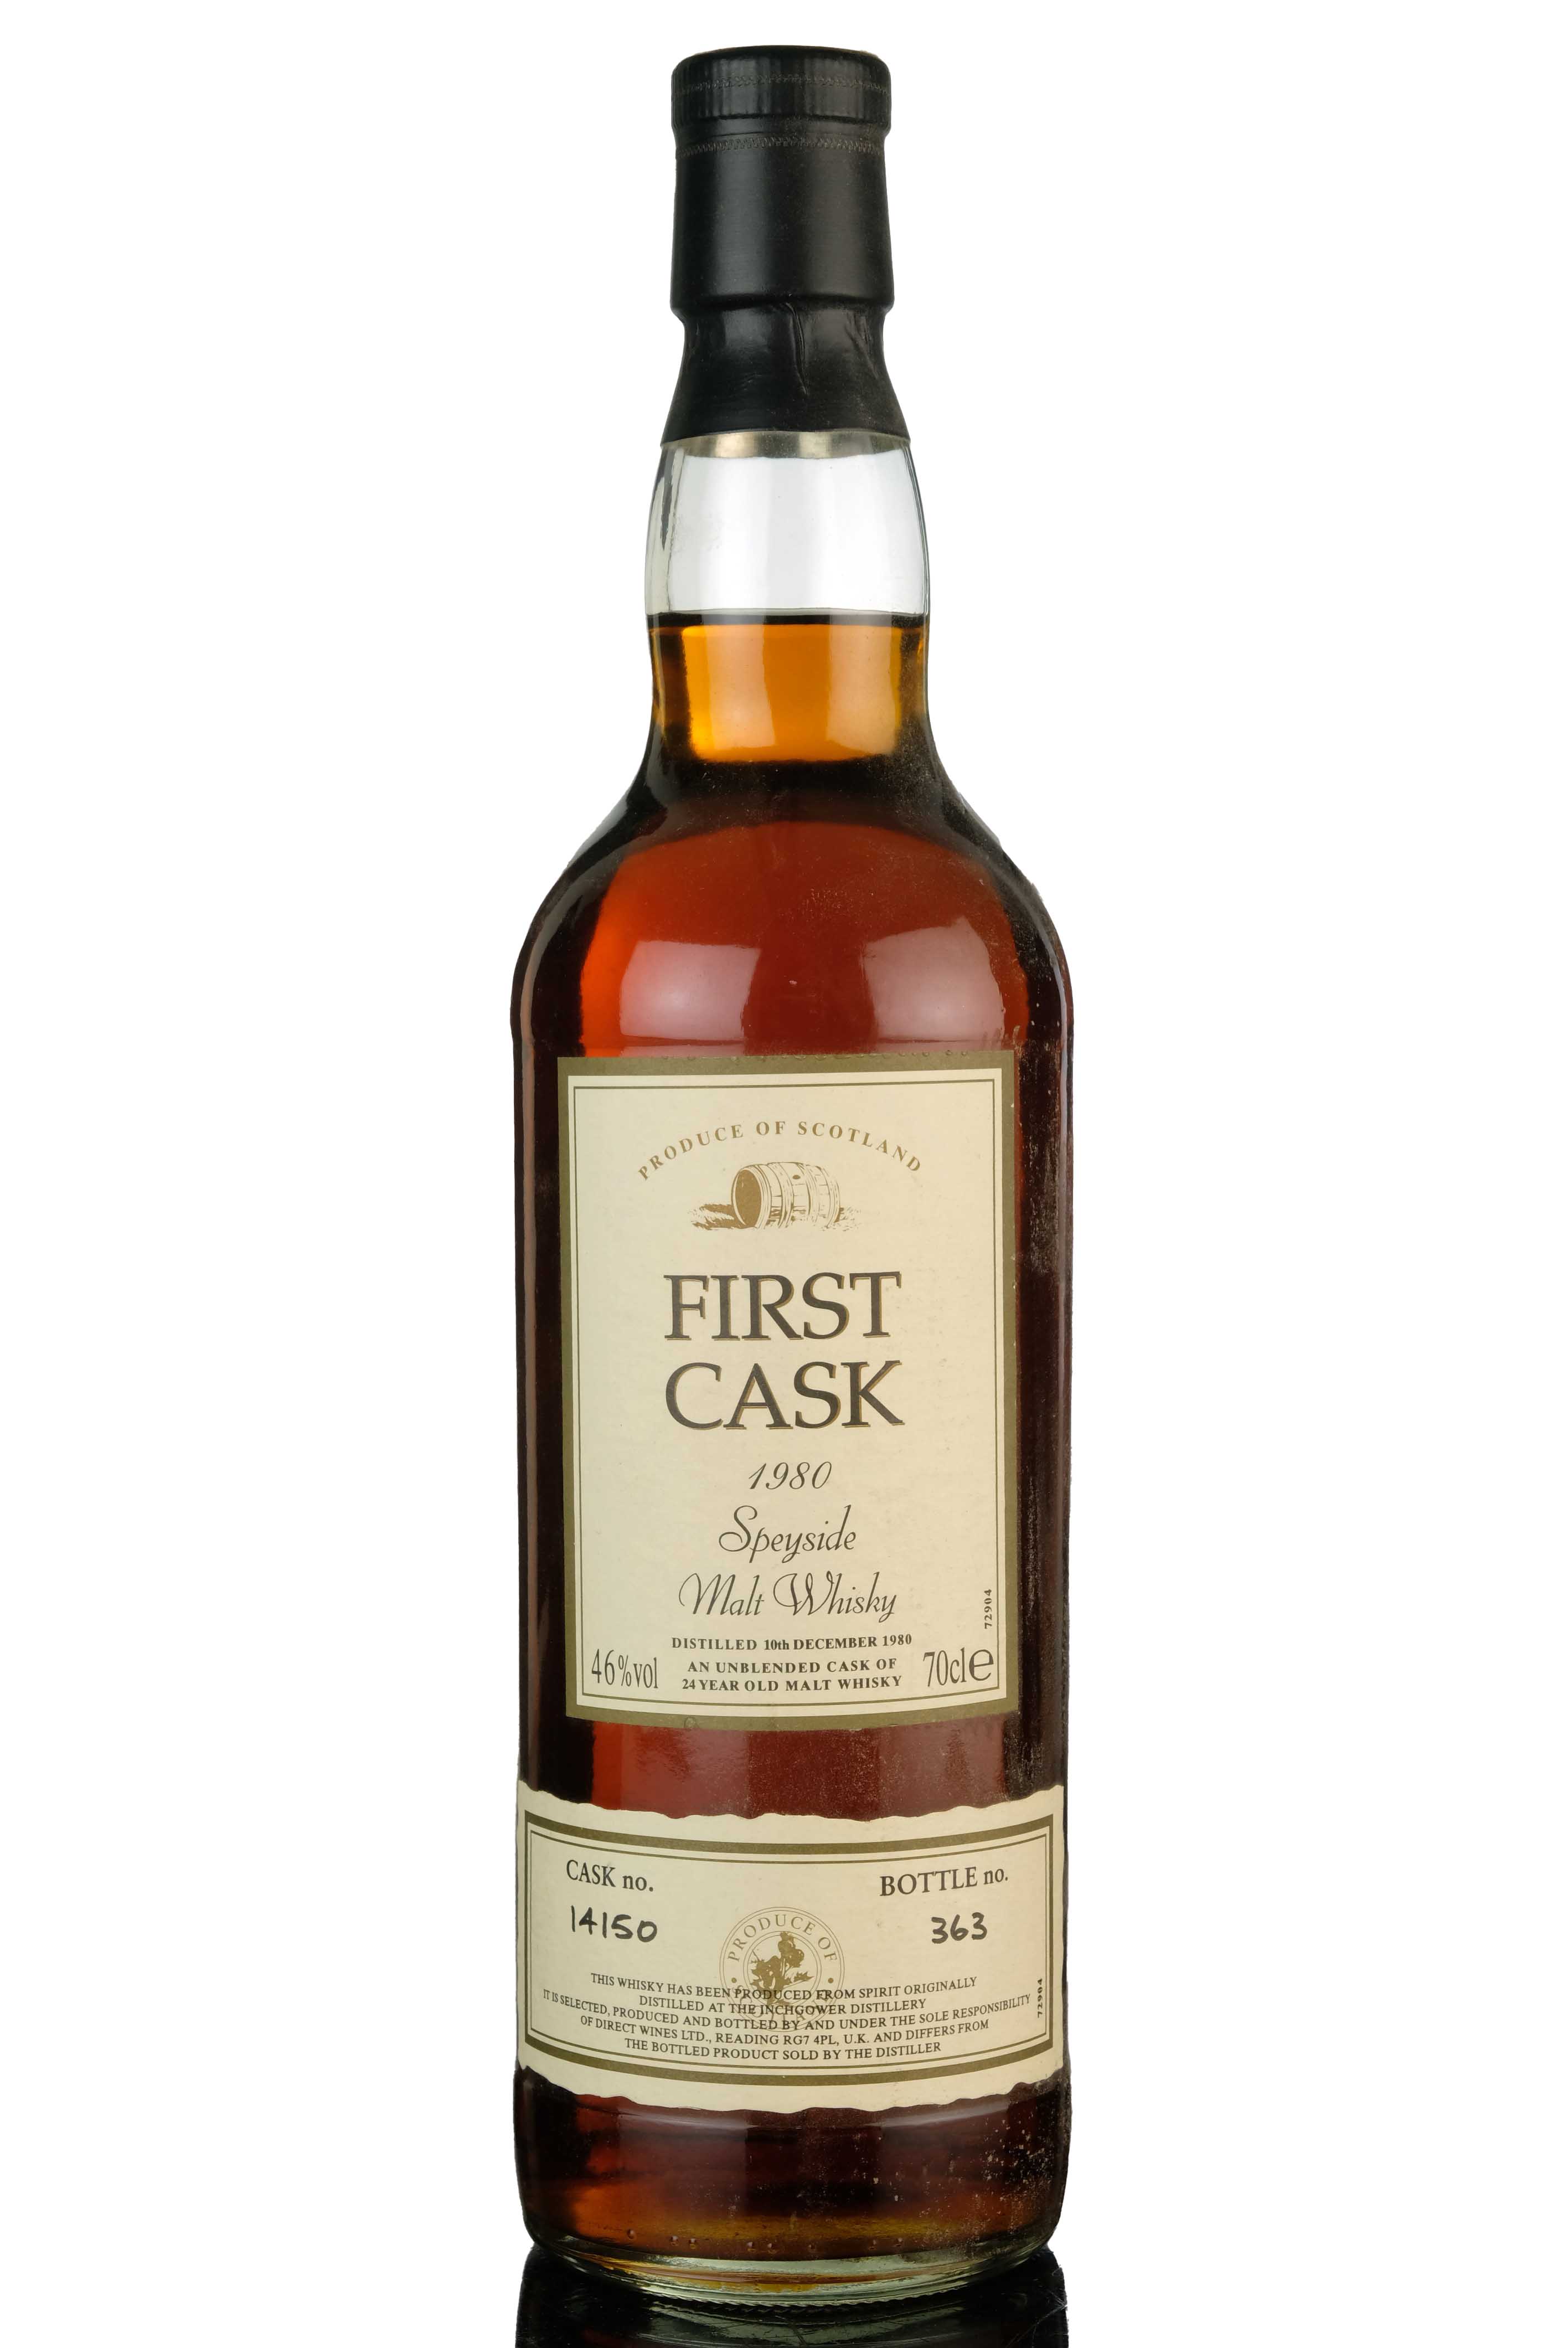 Inchgower 1980 - 24 Year Old - First Cask - Single Cask 14150